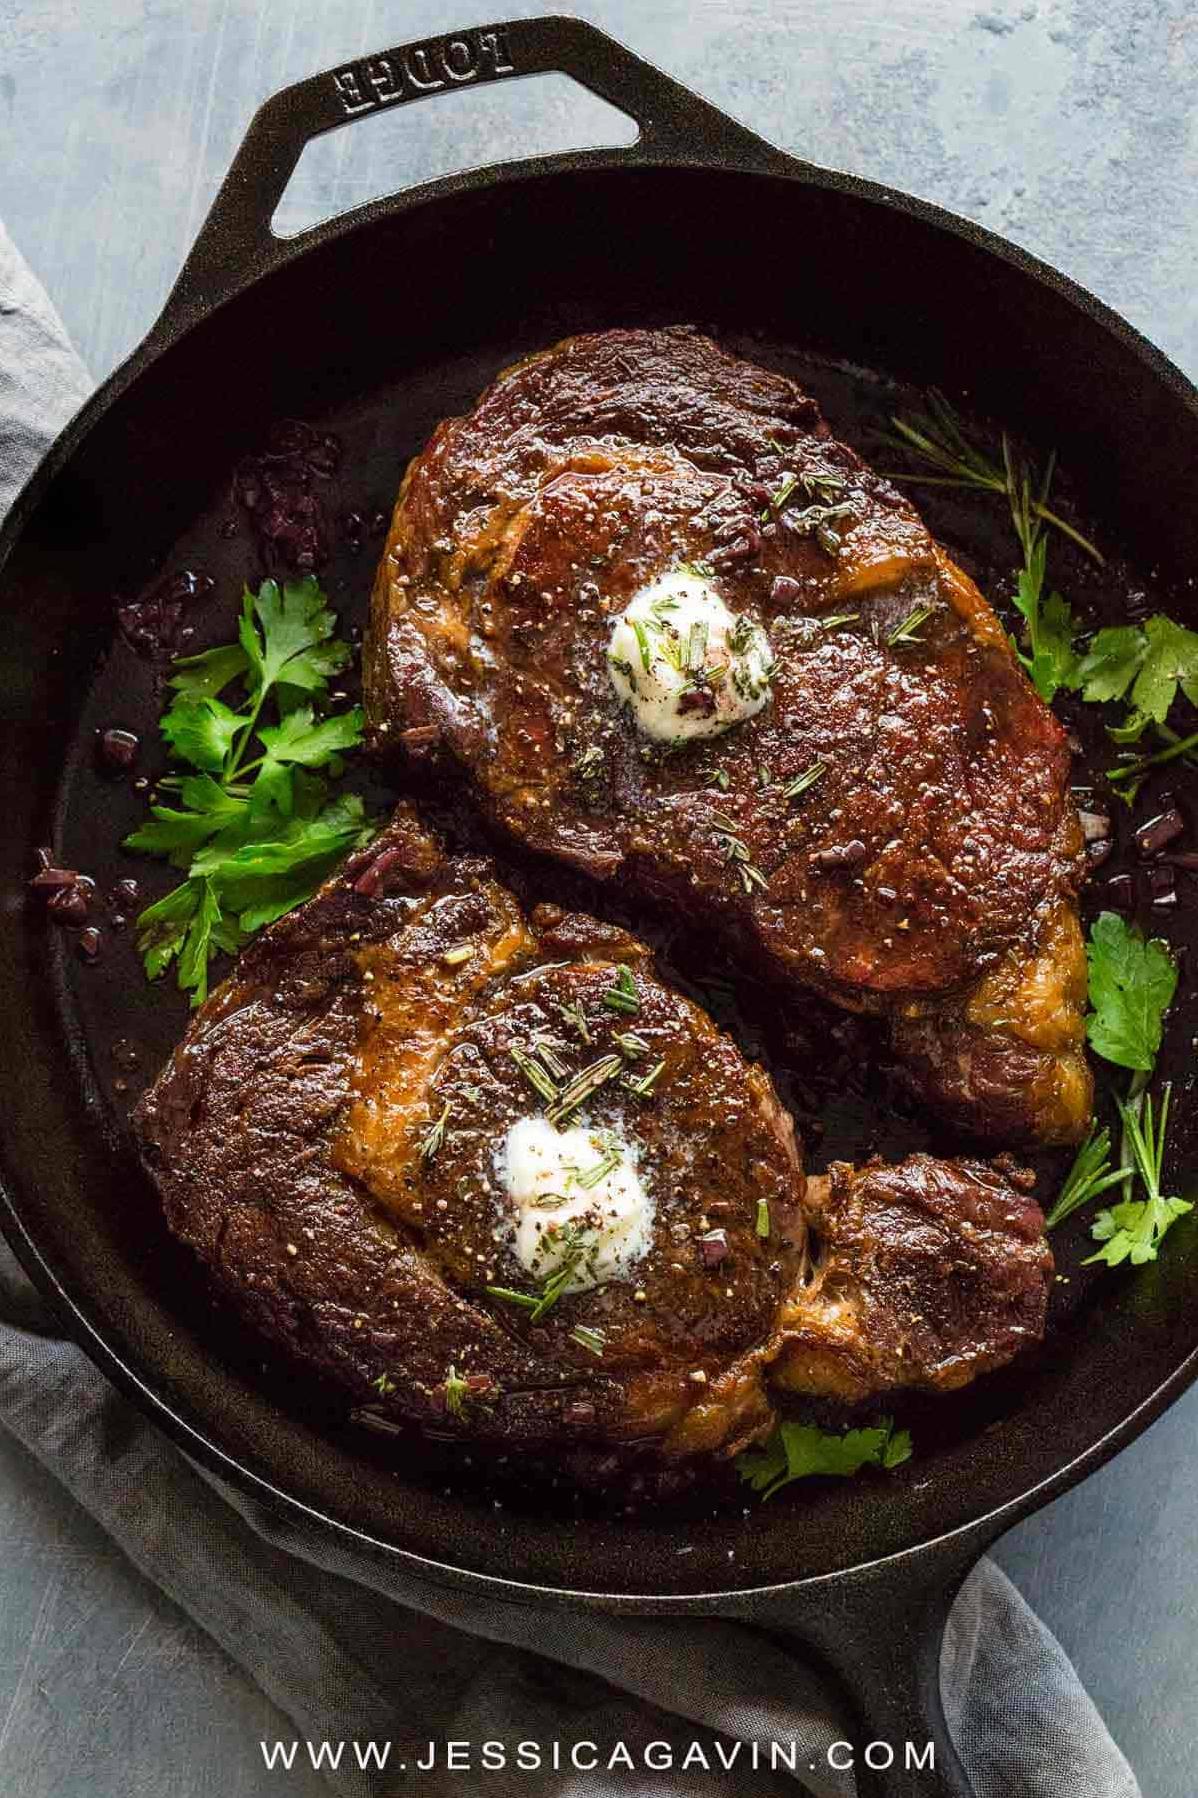  Red wine sauce, the perfect partner to elevate your steak game